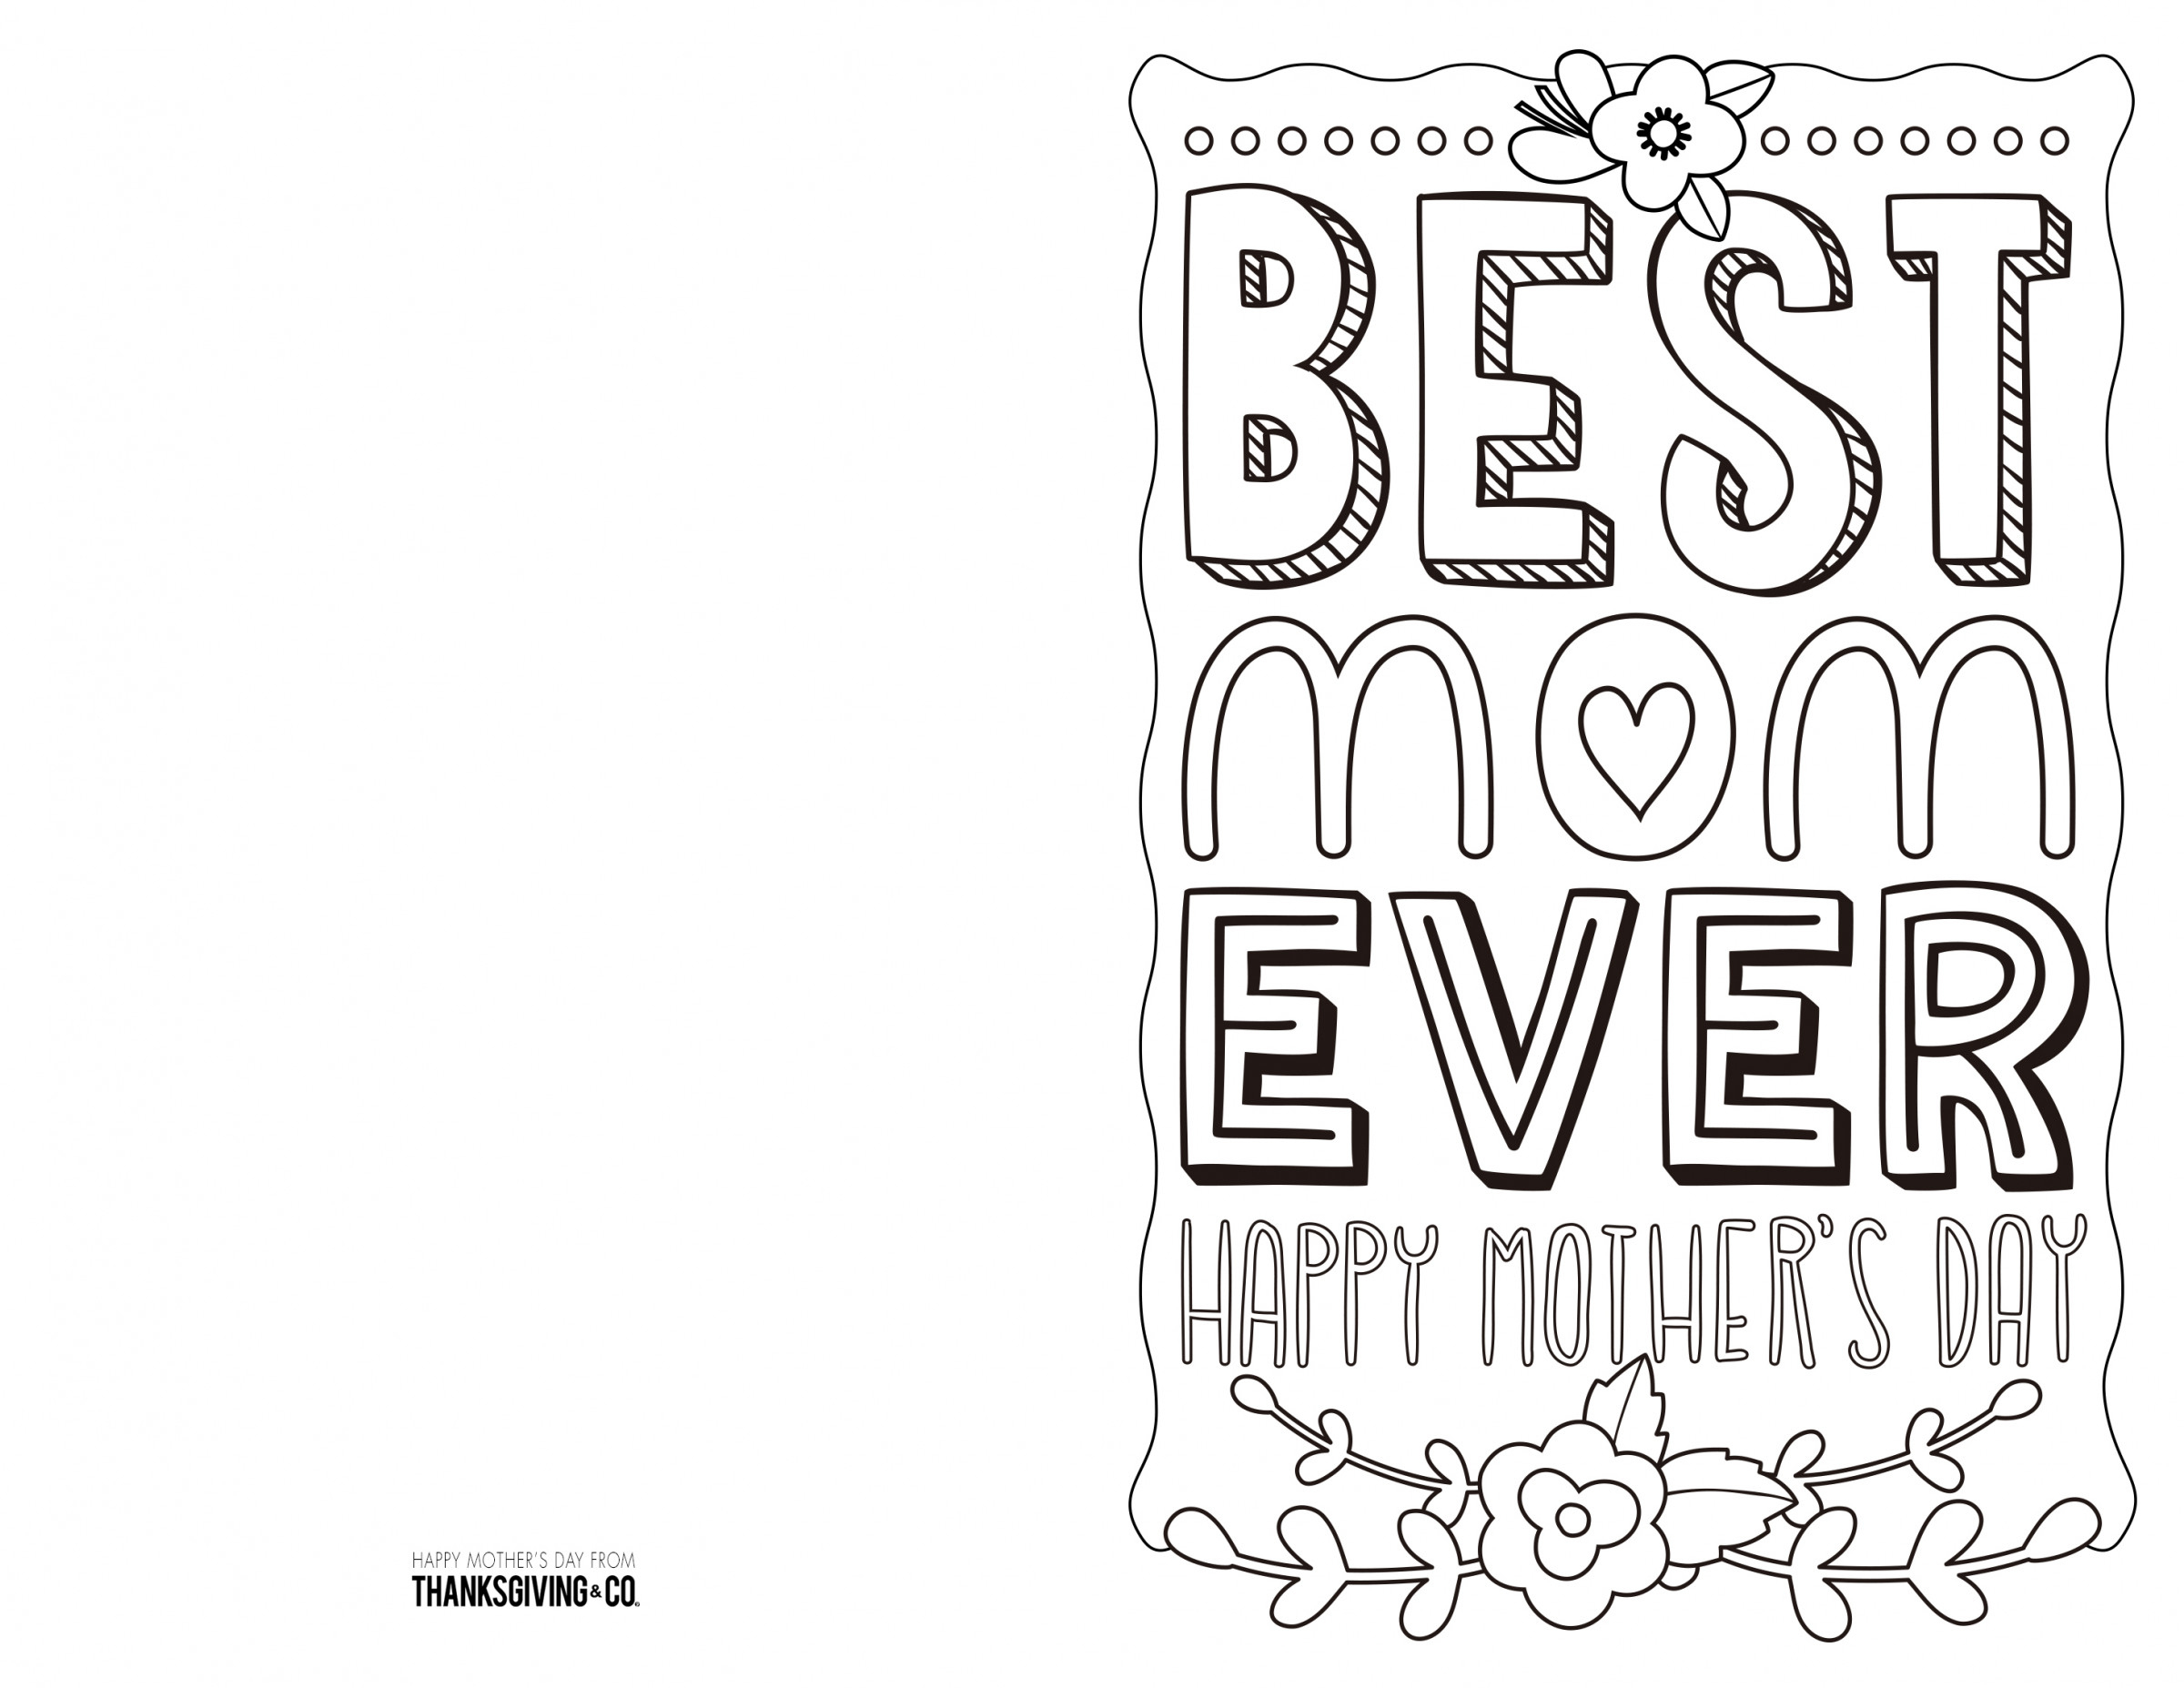 4 Free Printable Mother&amp;#039;s Day Ecards To Color - Thanksgiving - Free Printable Mothers Day Cards